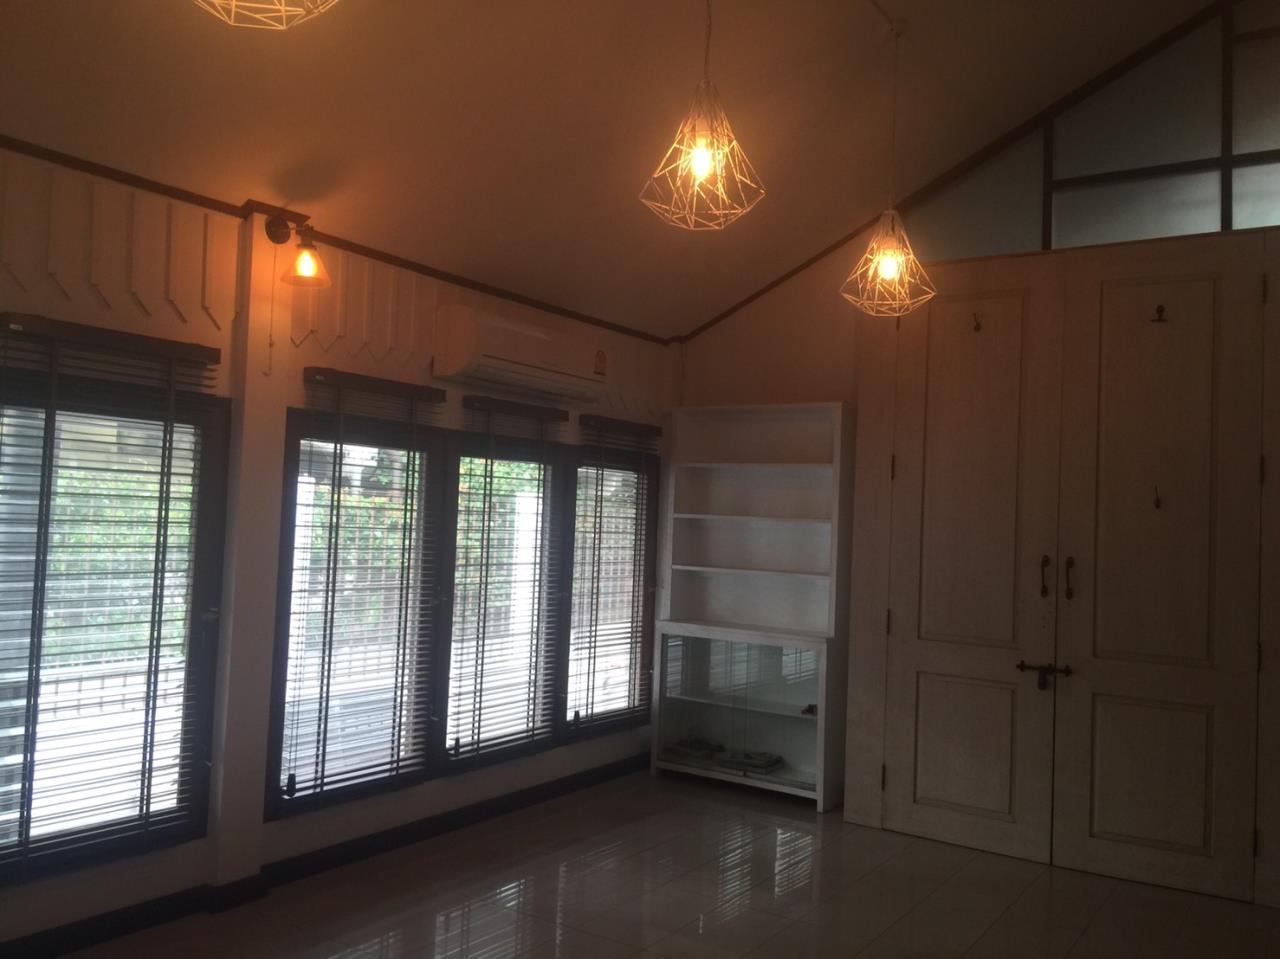 RE/MAX Properties Agency's 3 Bedroom House for Rent near Sathorn/Lumpini 7